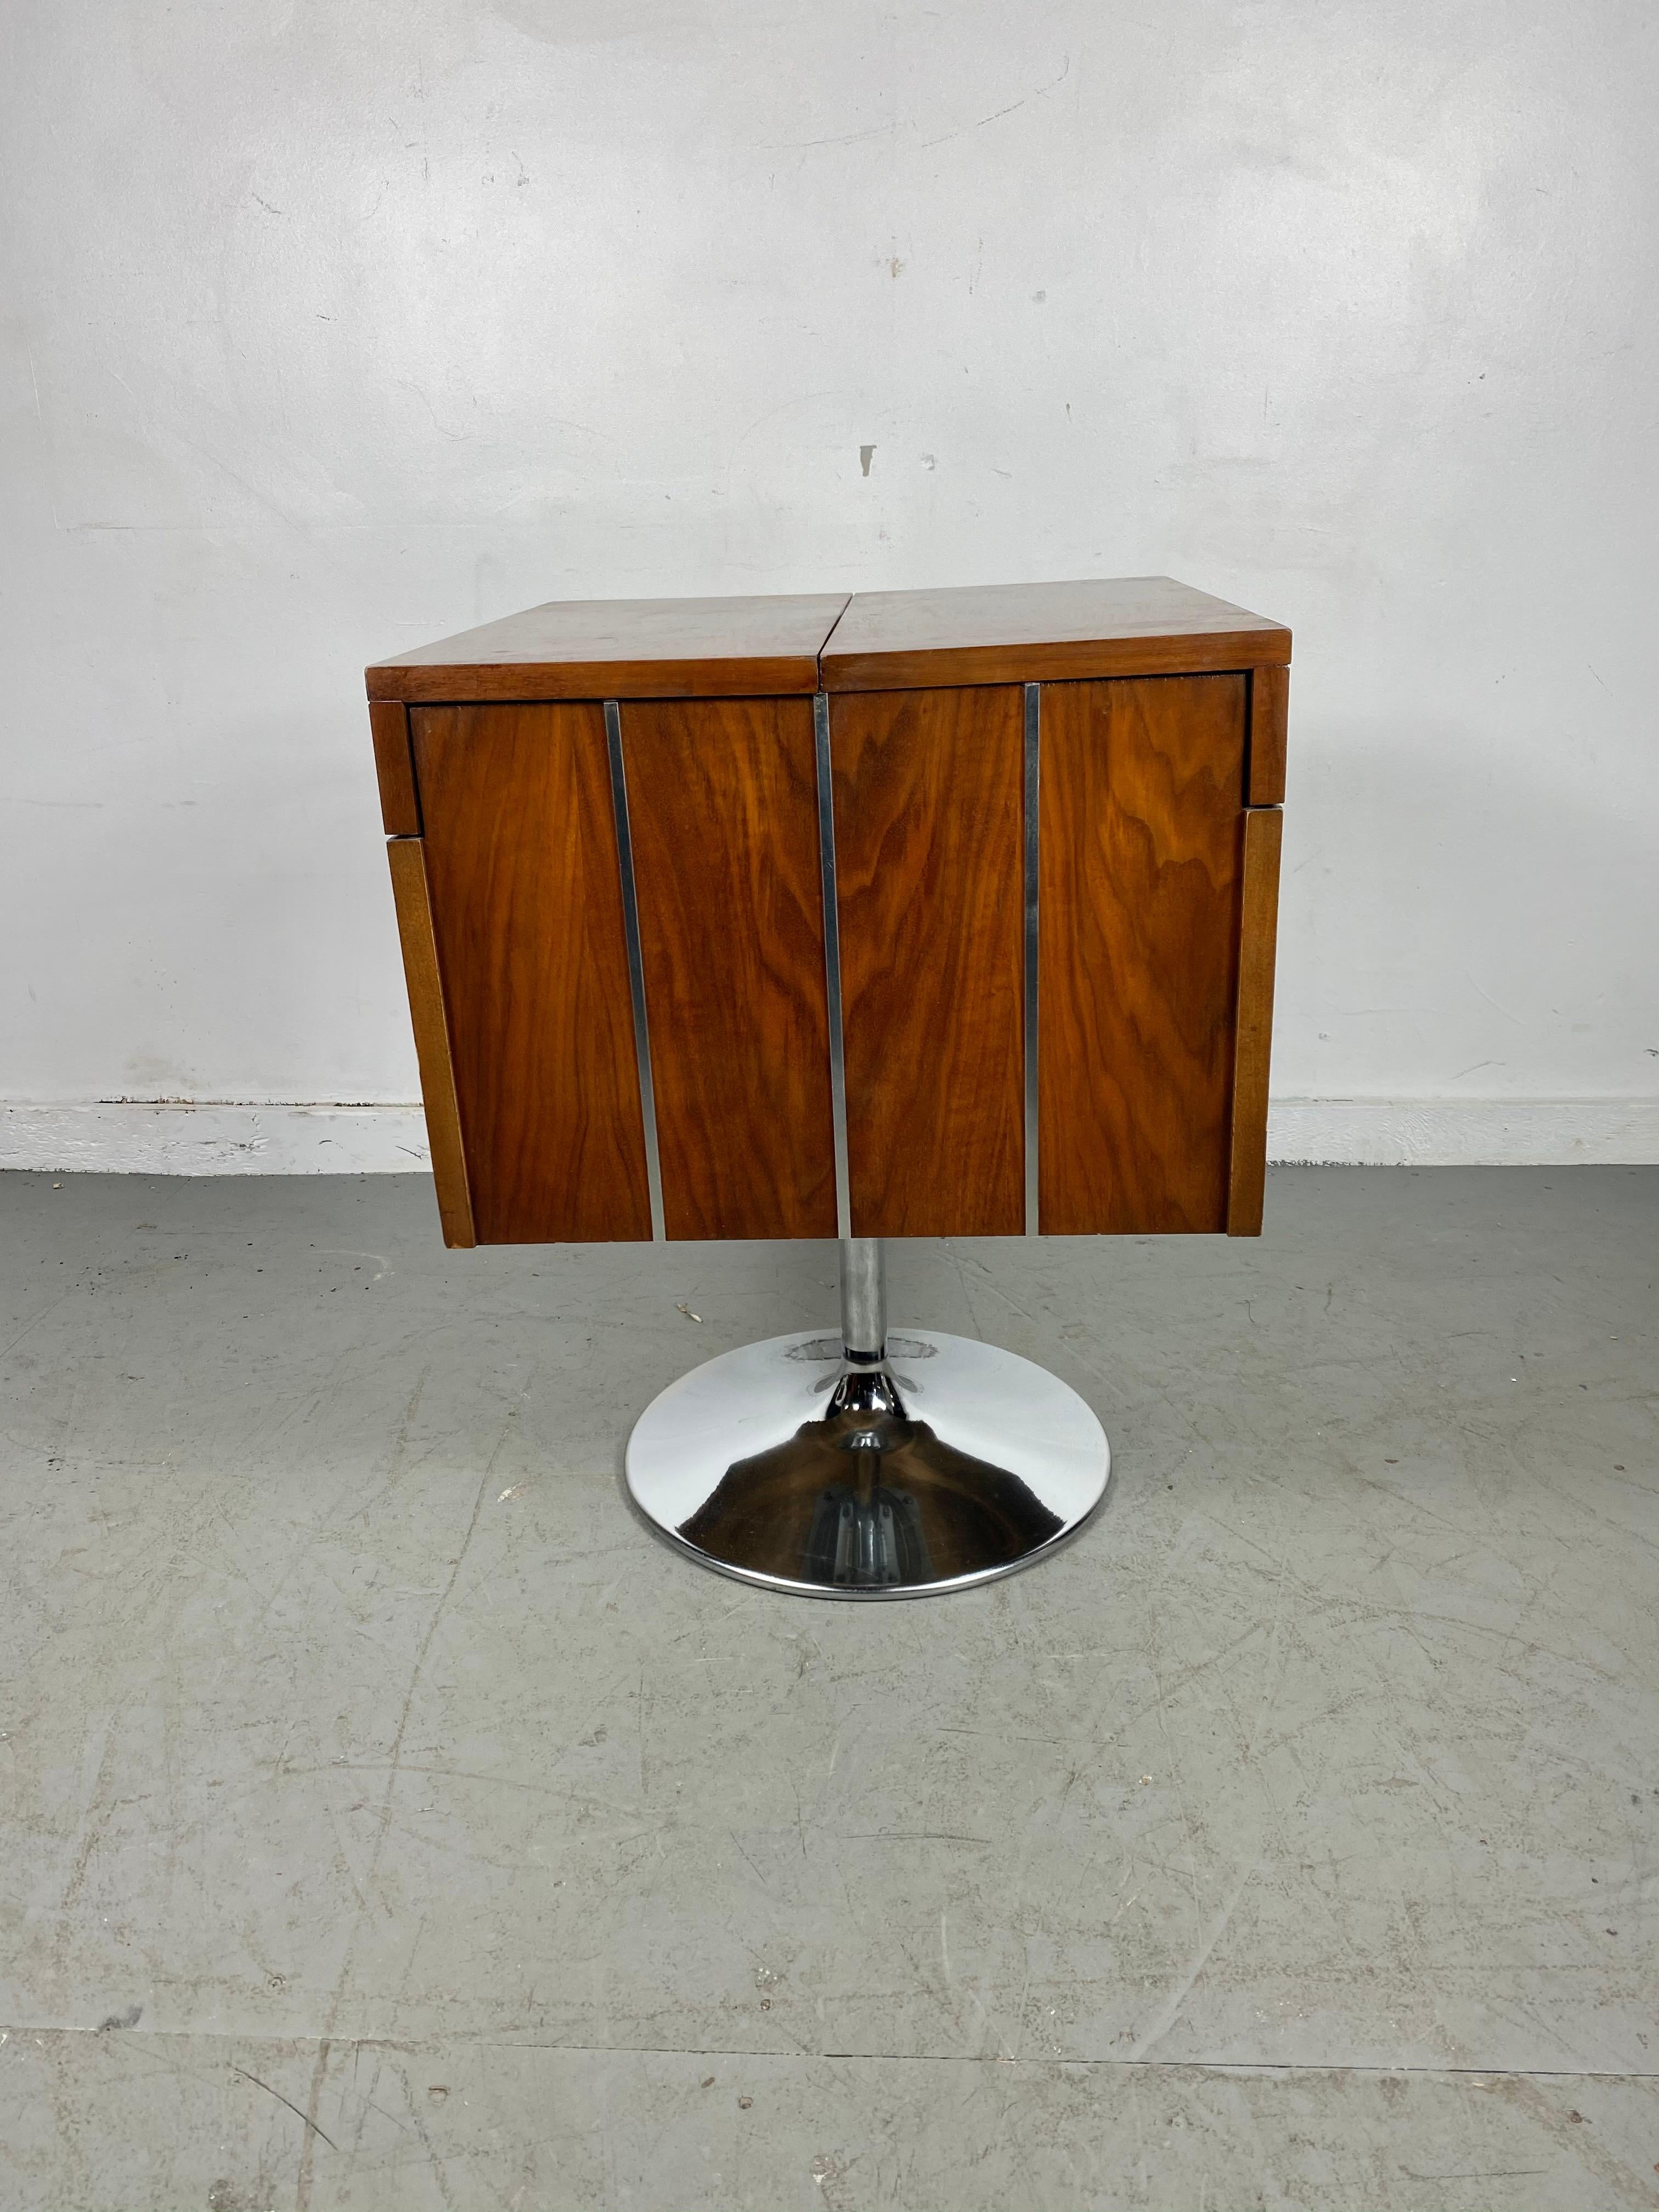 Modernist, Space Age walnut and chrome folding, revolving bar by LANE. Great design, book matched wood graining, chrome tulip pedistal, full 360 degree rotation, retains original insert for ice bucket, glasses etc. Bar measures 21 x 21 x 27